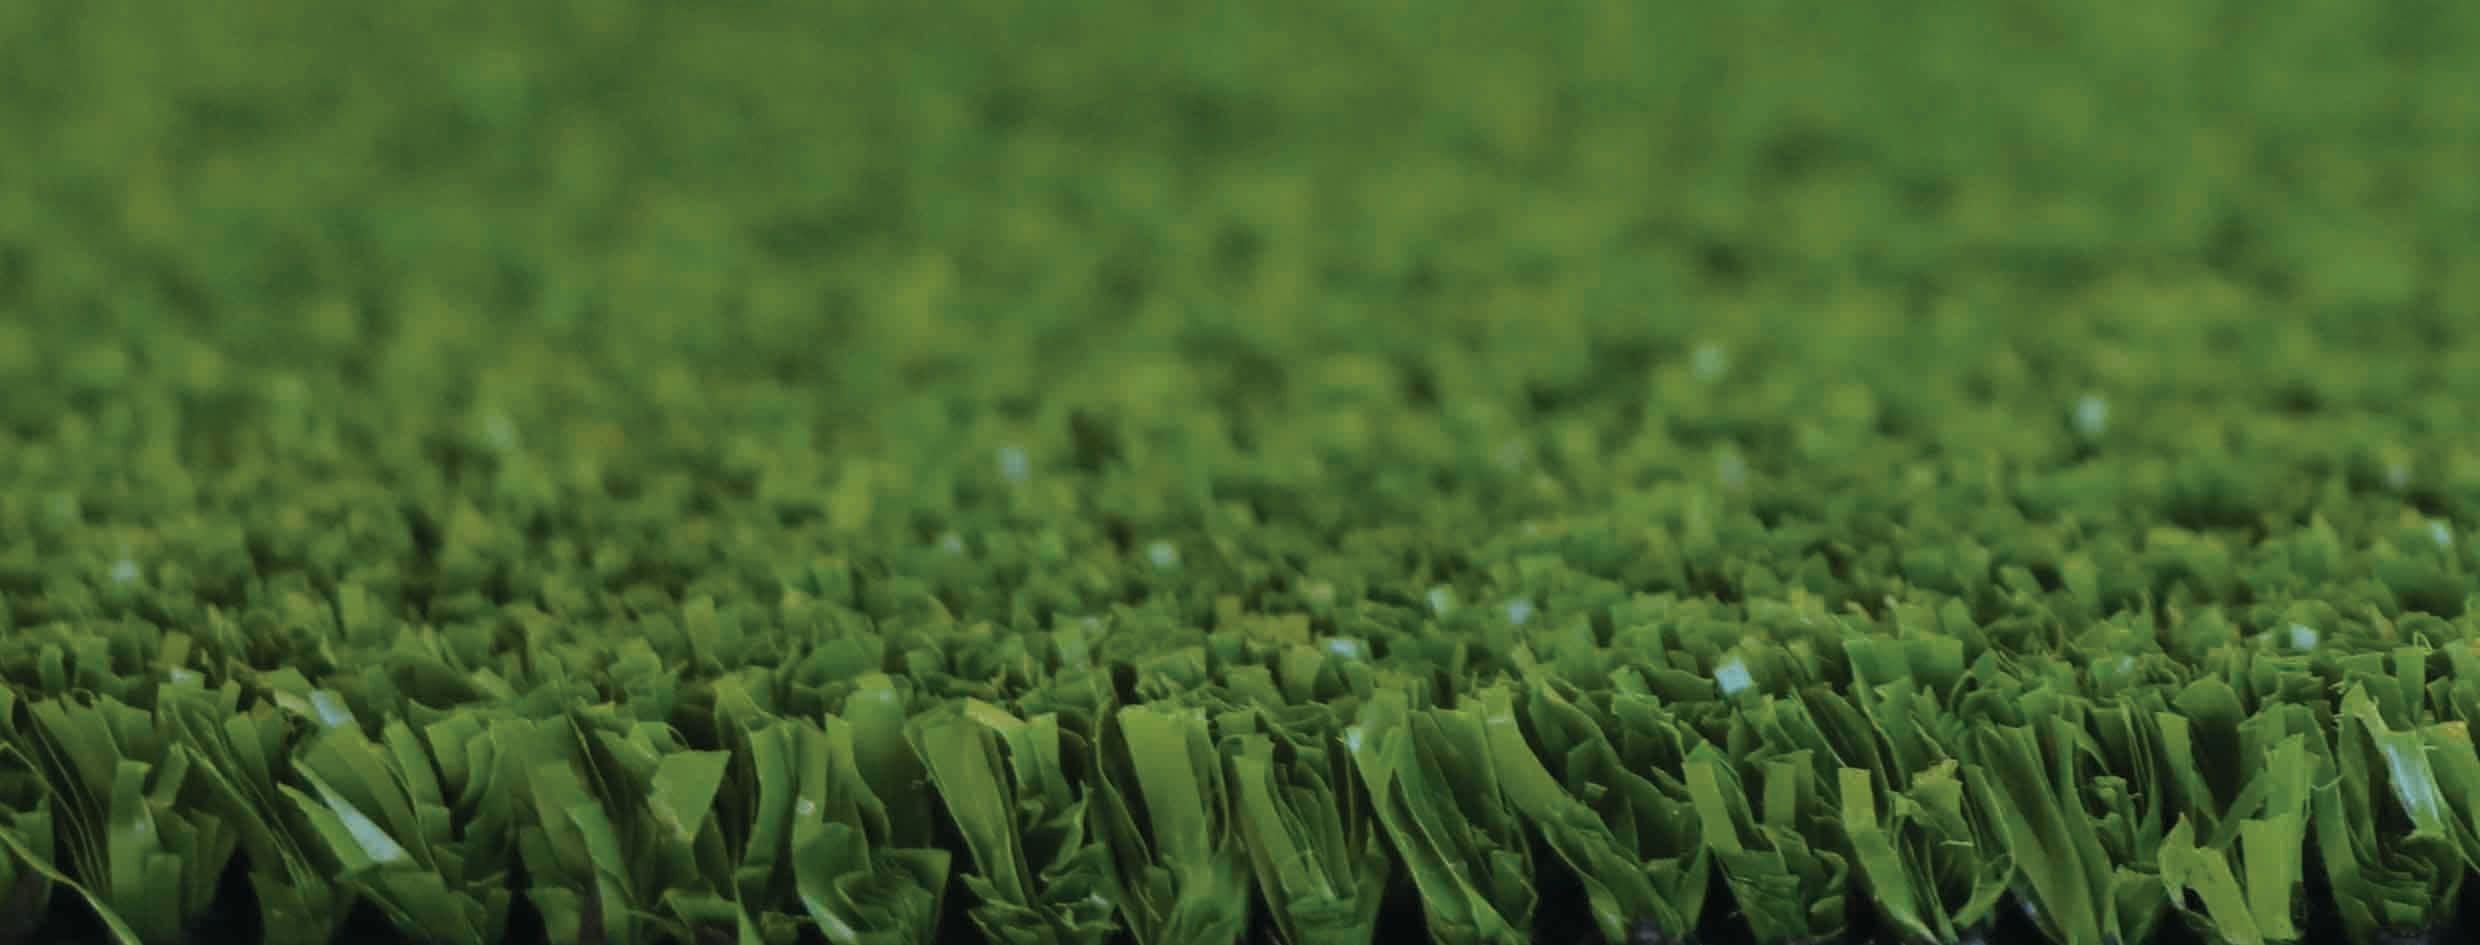 Practice Turf | Synthetic Grass